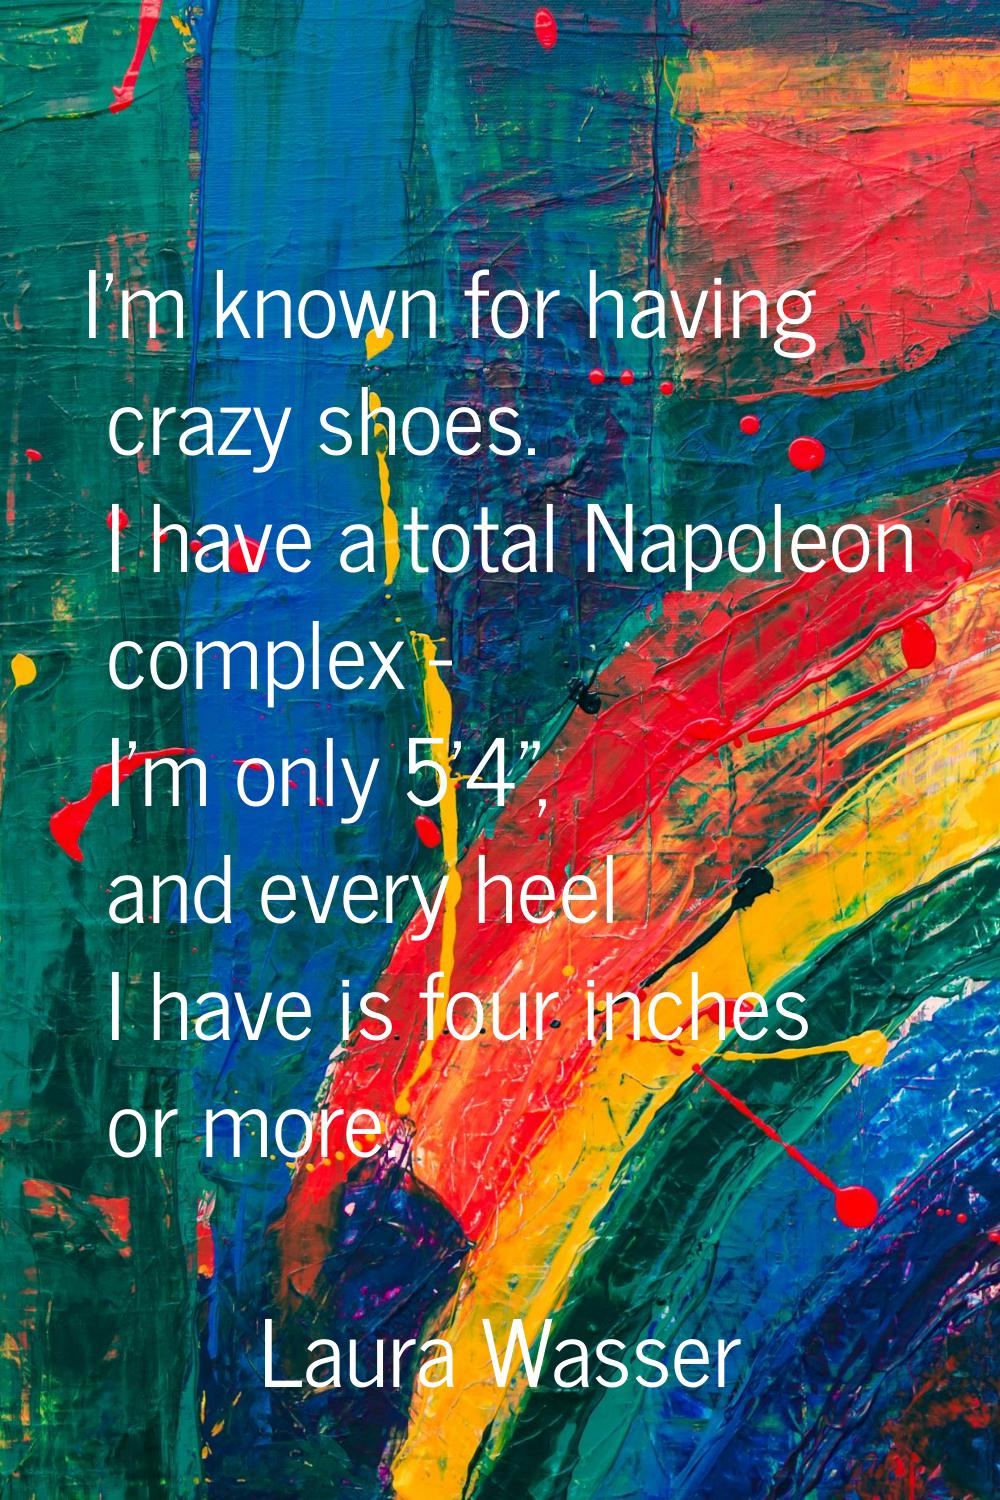 I'm known for having crazy shoes. I have a total Napoleon complex - I'm only 5'4", and every heel I